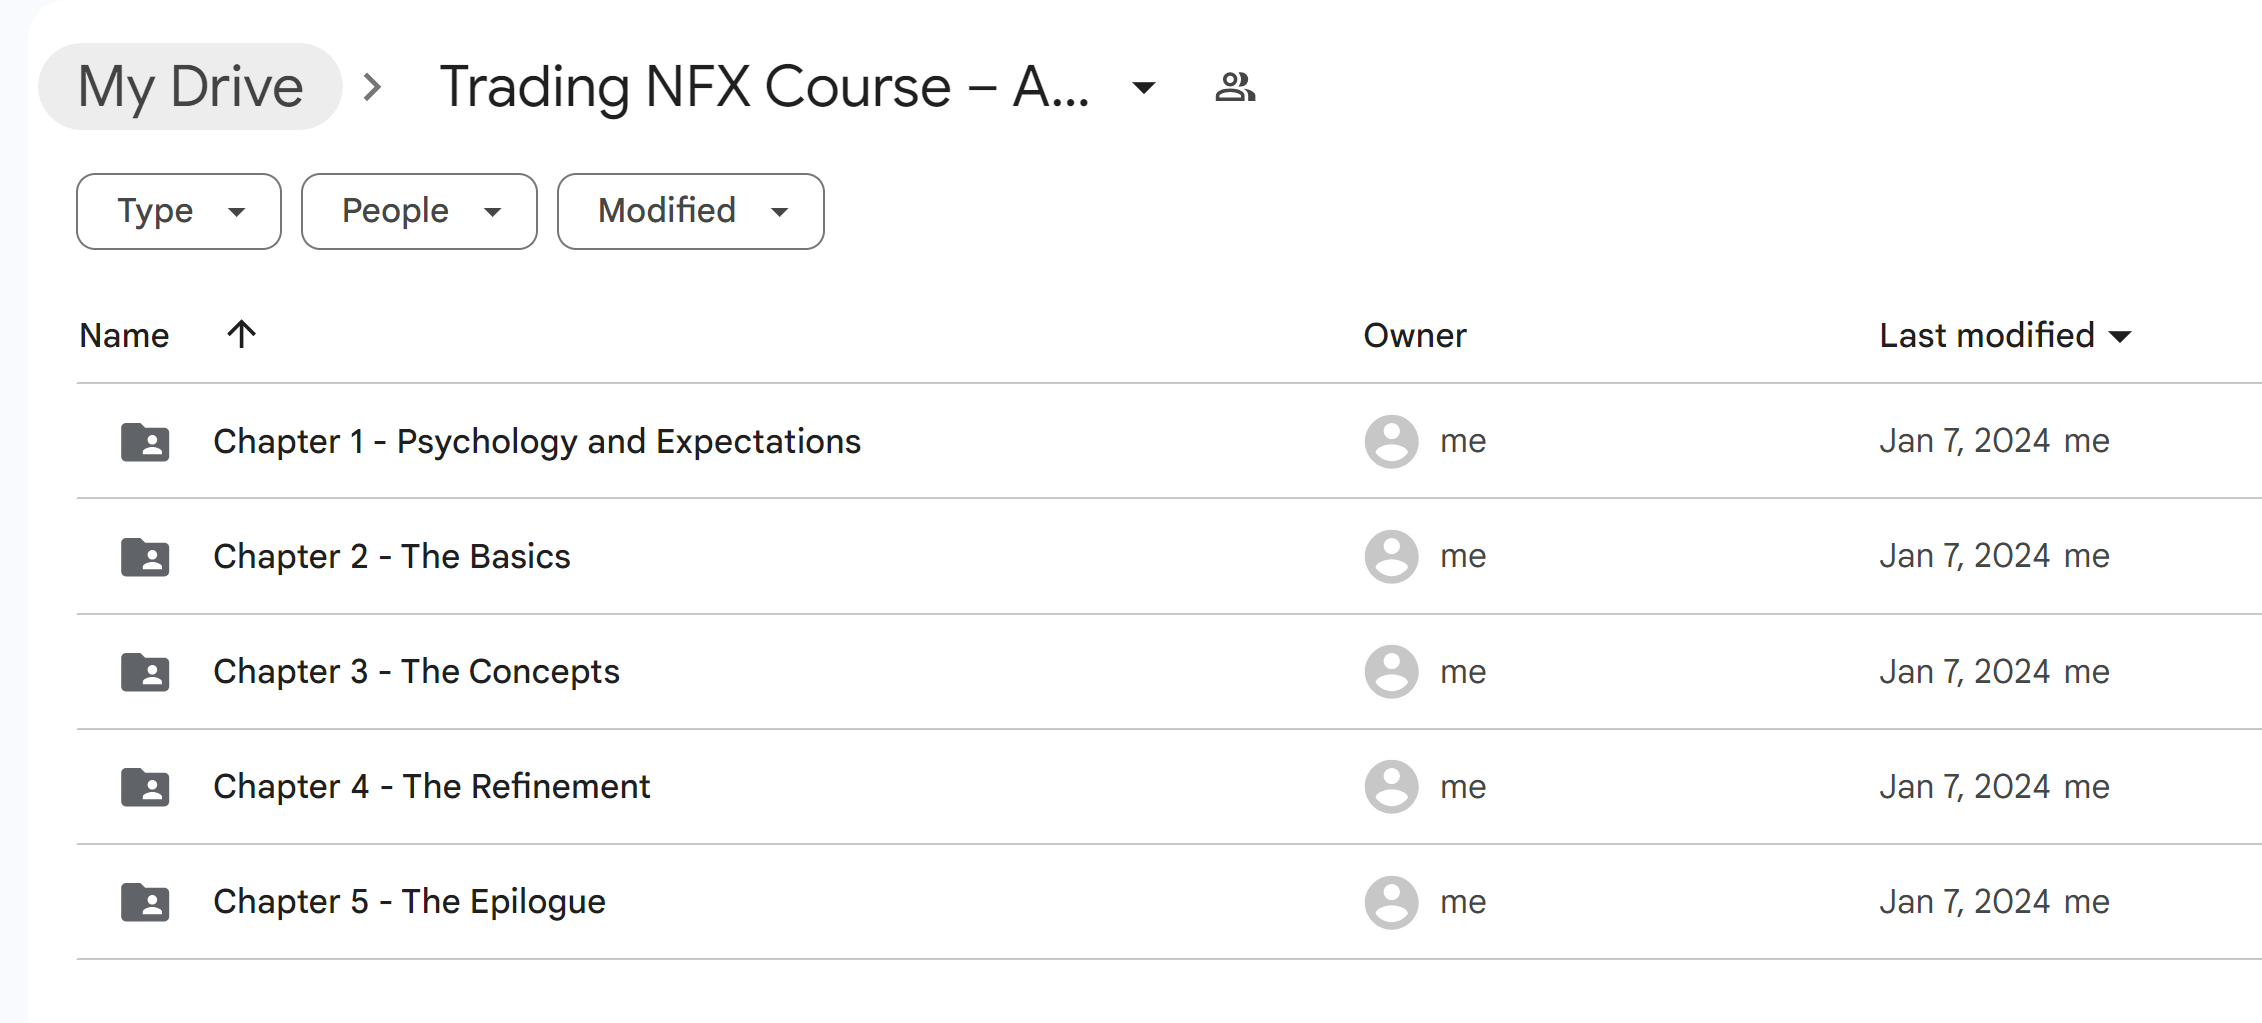 Andrew Nfx Trading Nfx Course